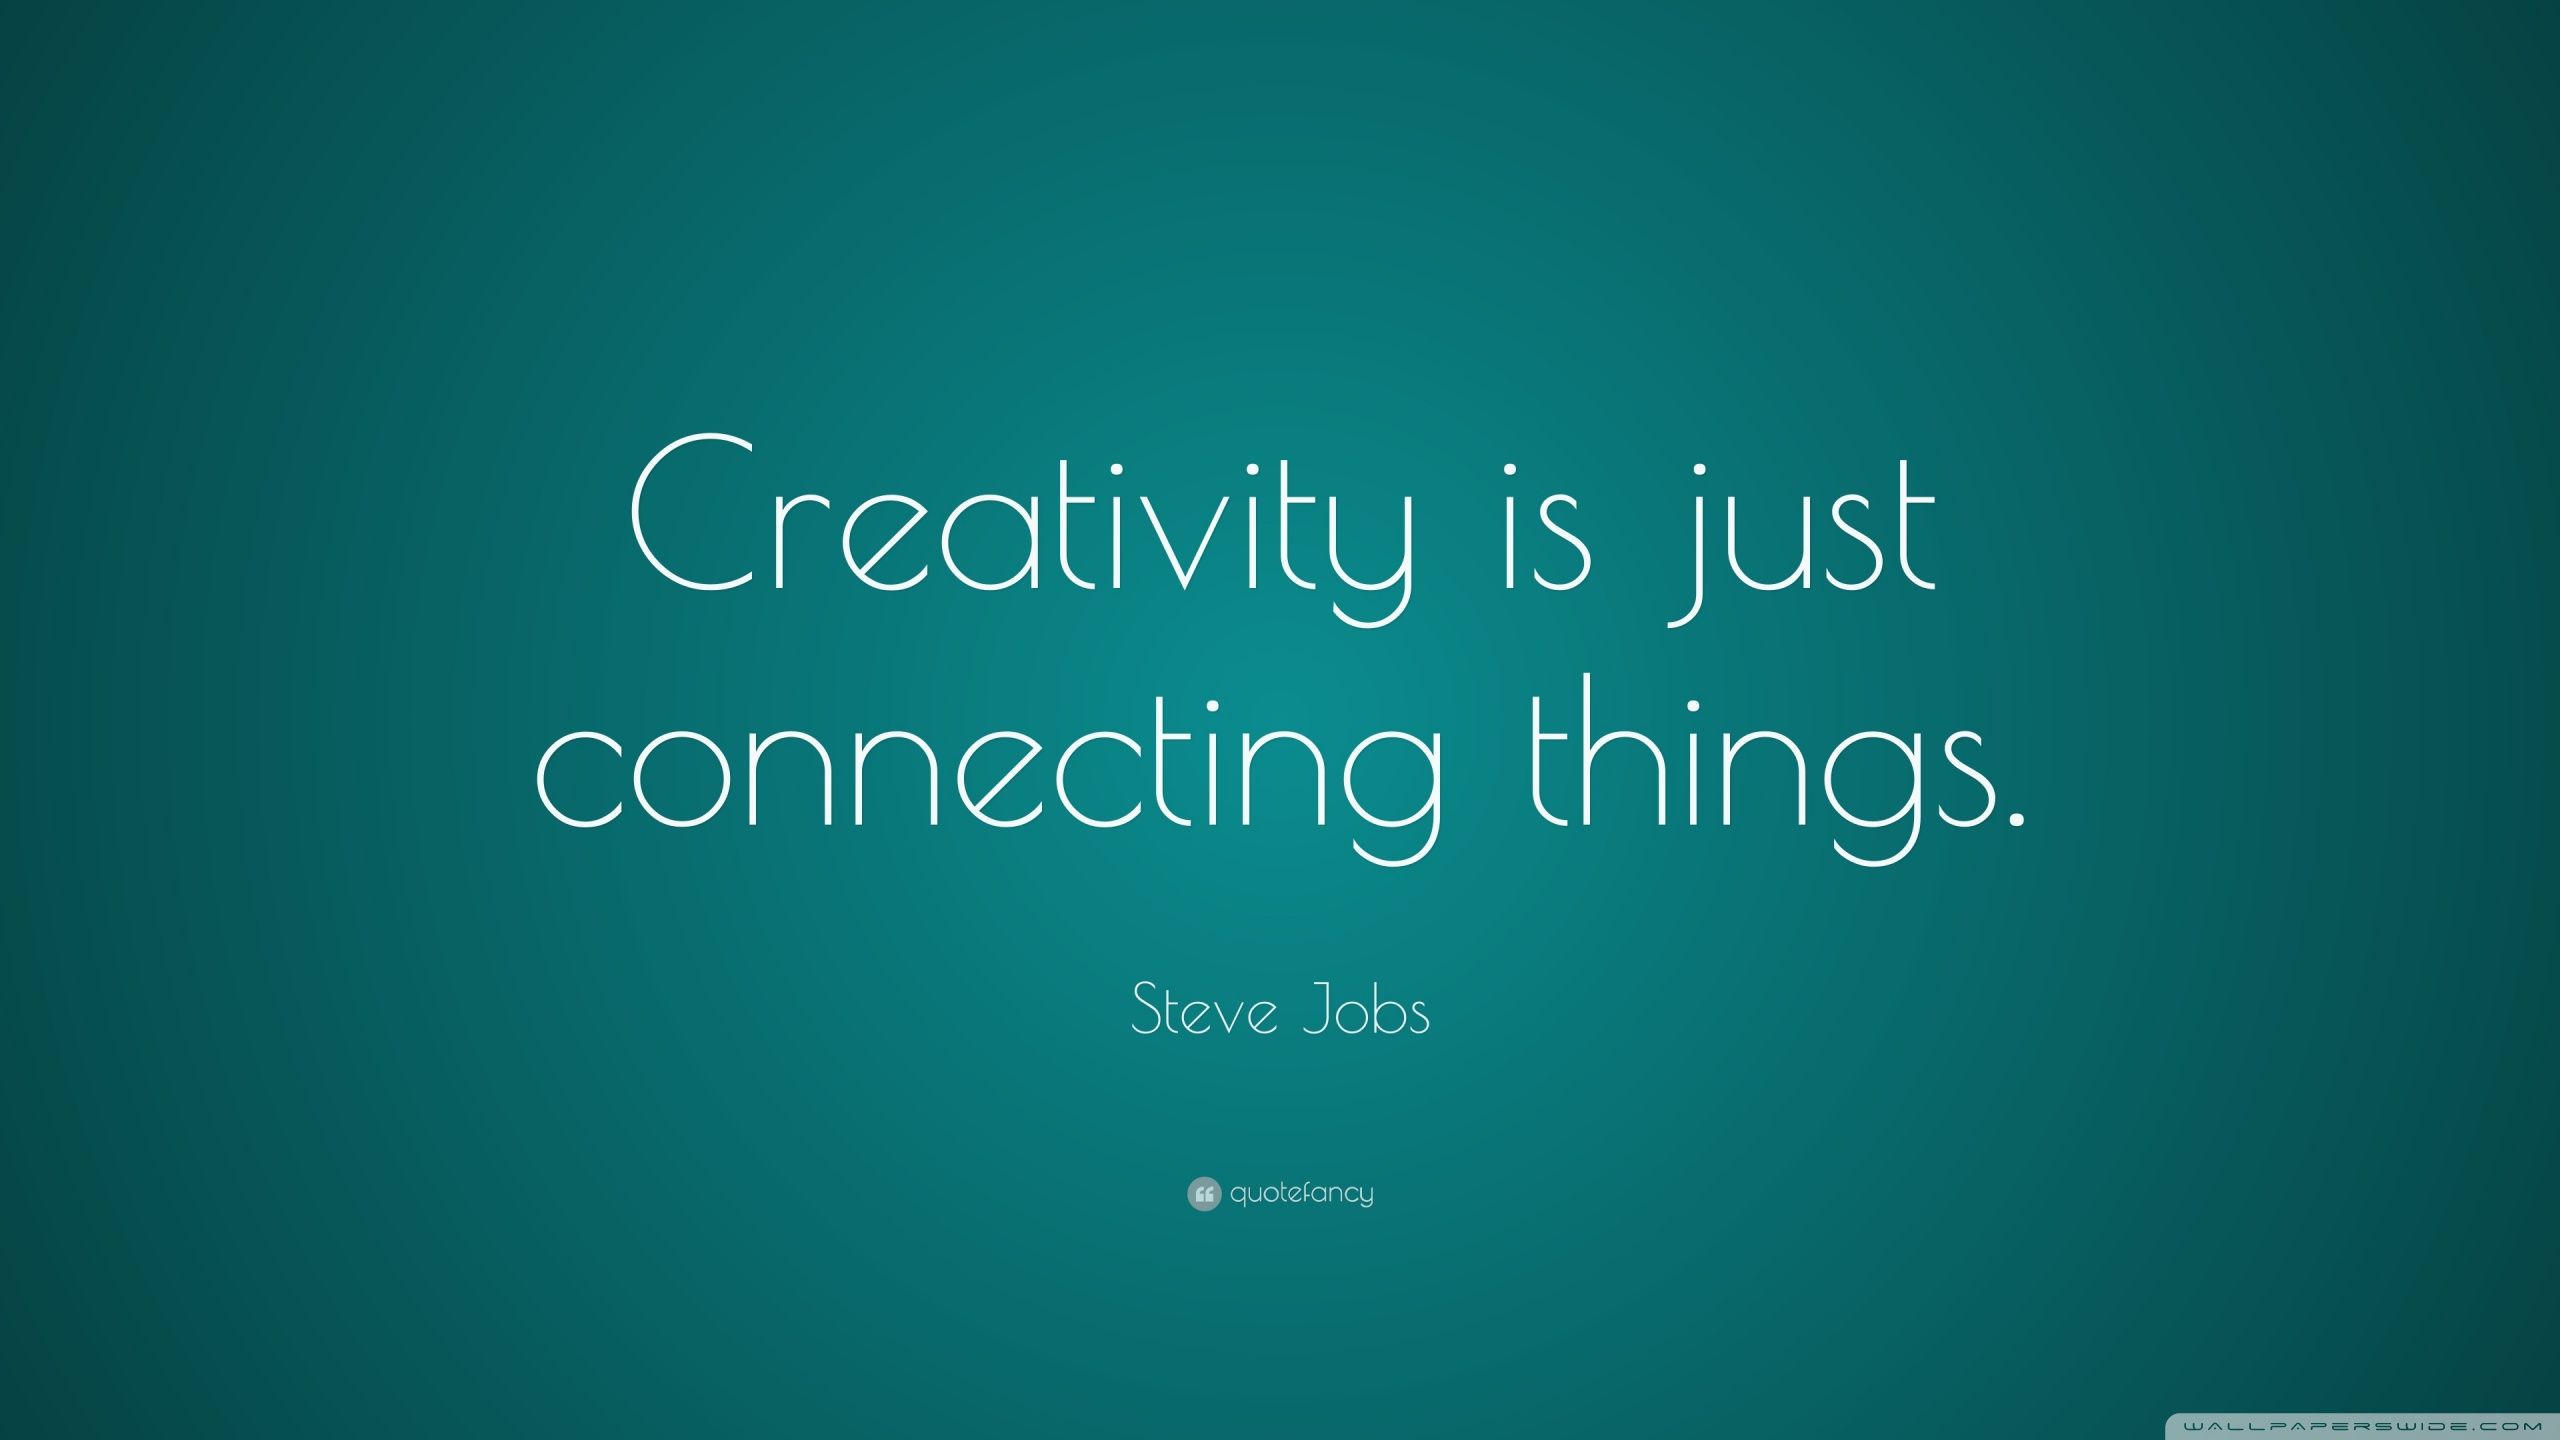 Creativity is just connecting things Ultra HD Desktop Background Wallpaper for 4K UHD TV, Widescreen & UltraWide Desktop & Laptop, Multi Display, Dual Monitor, Tablet